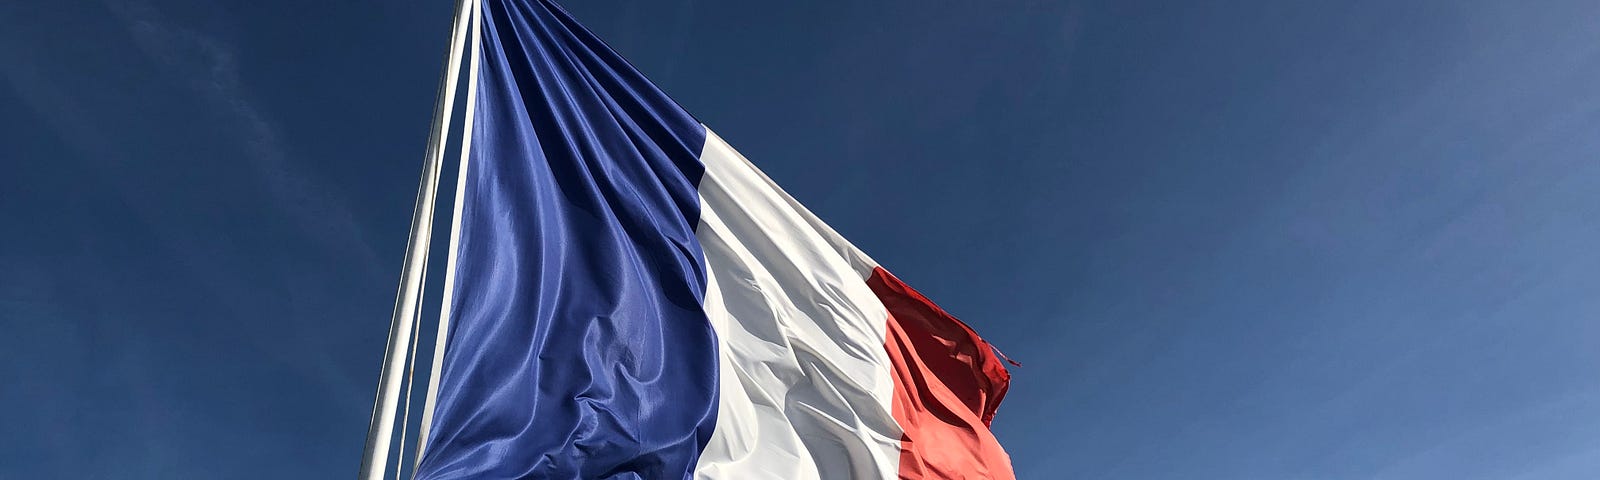 An image depicting the French Flag